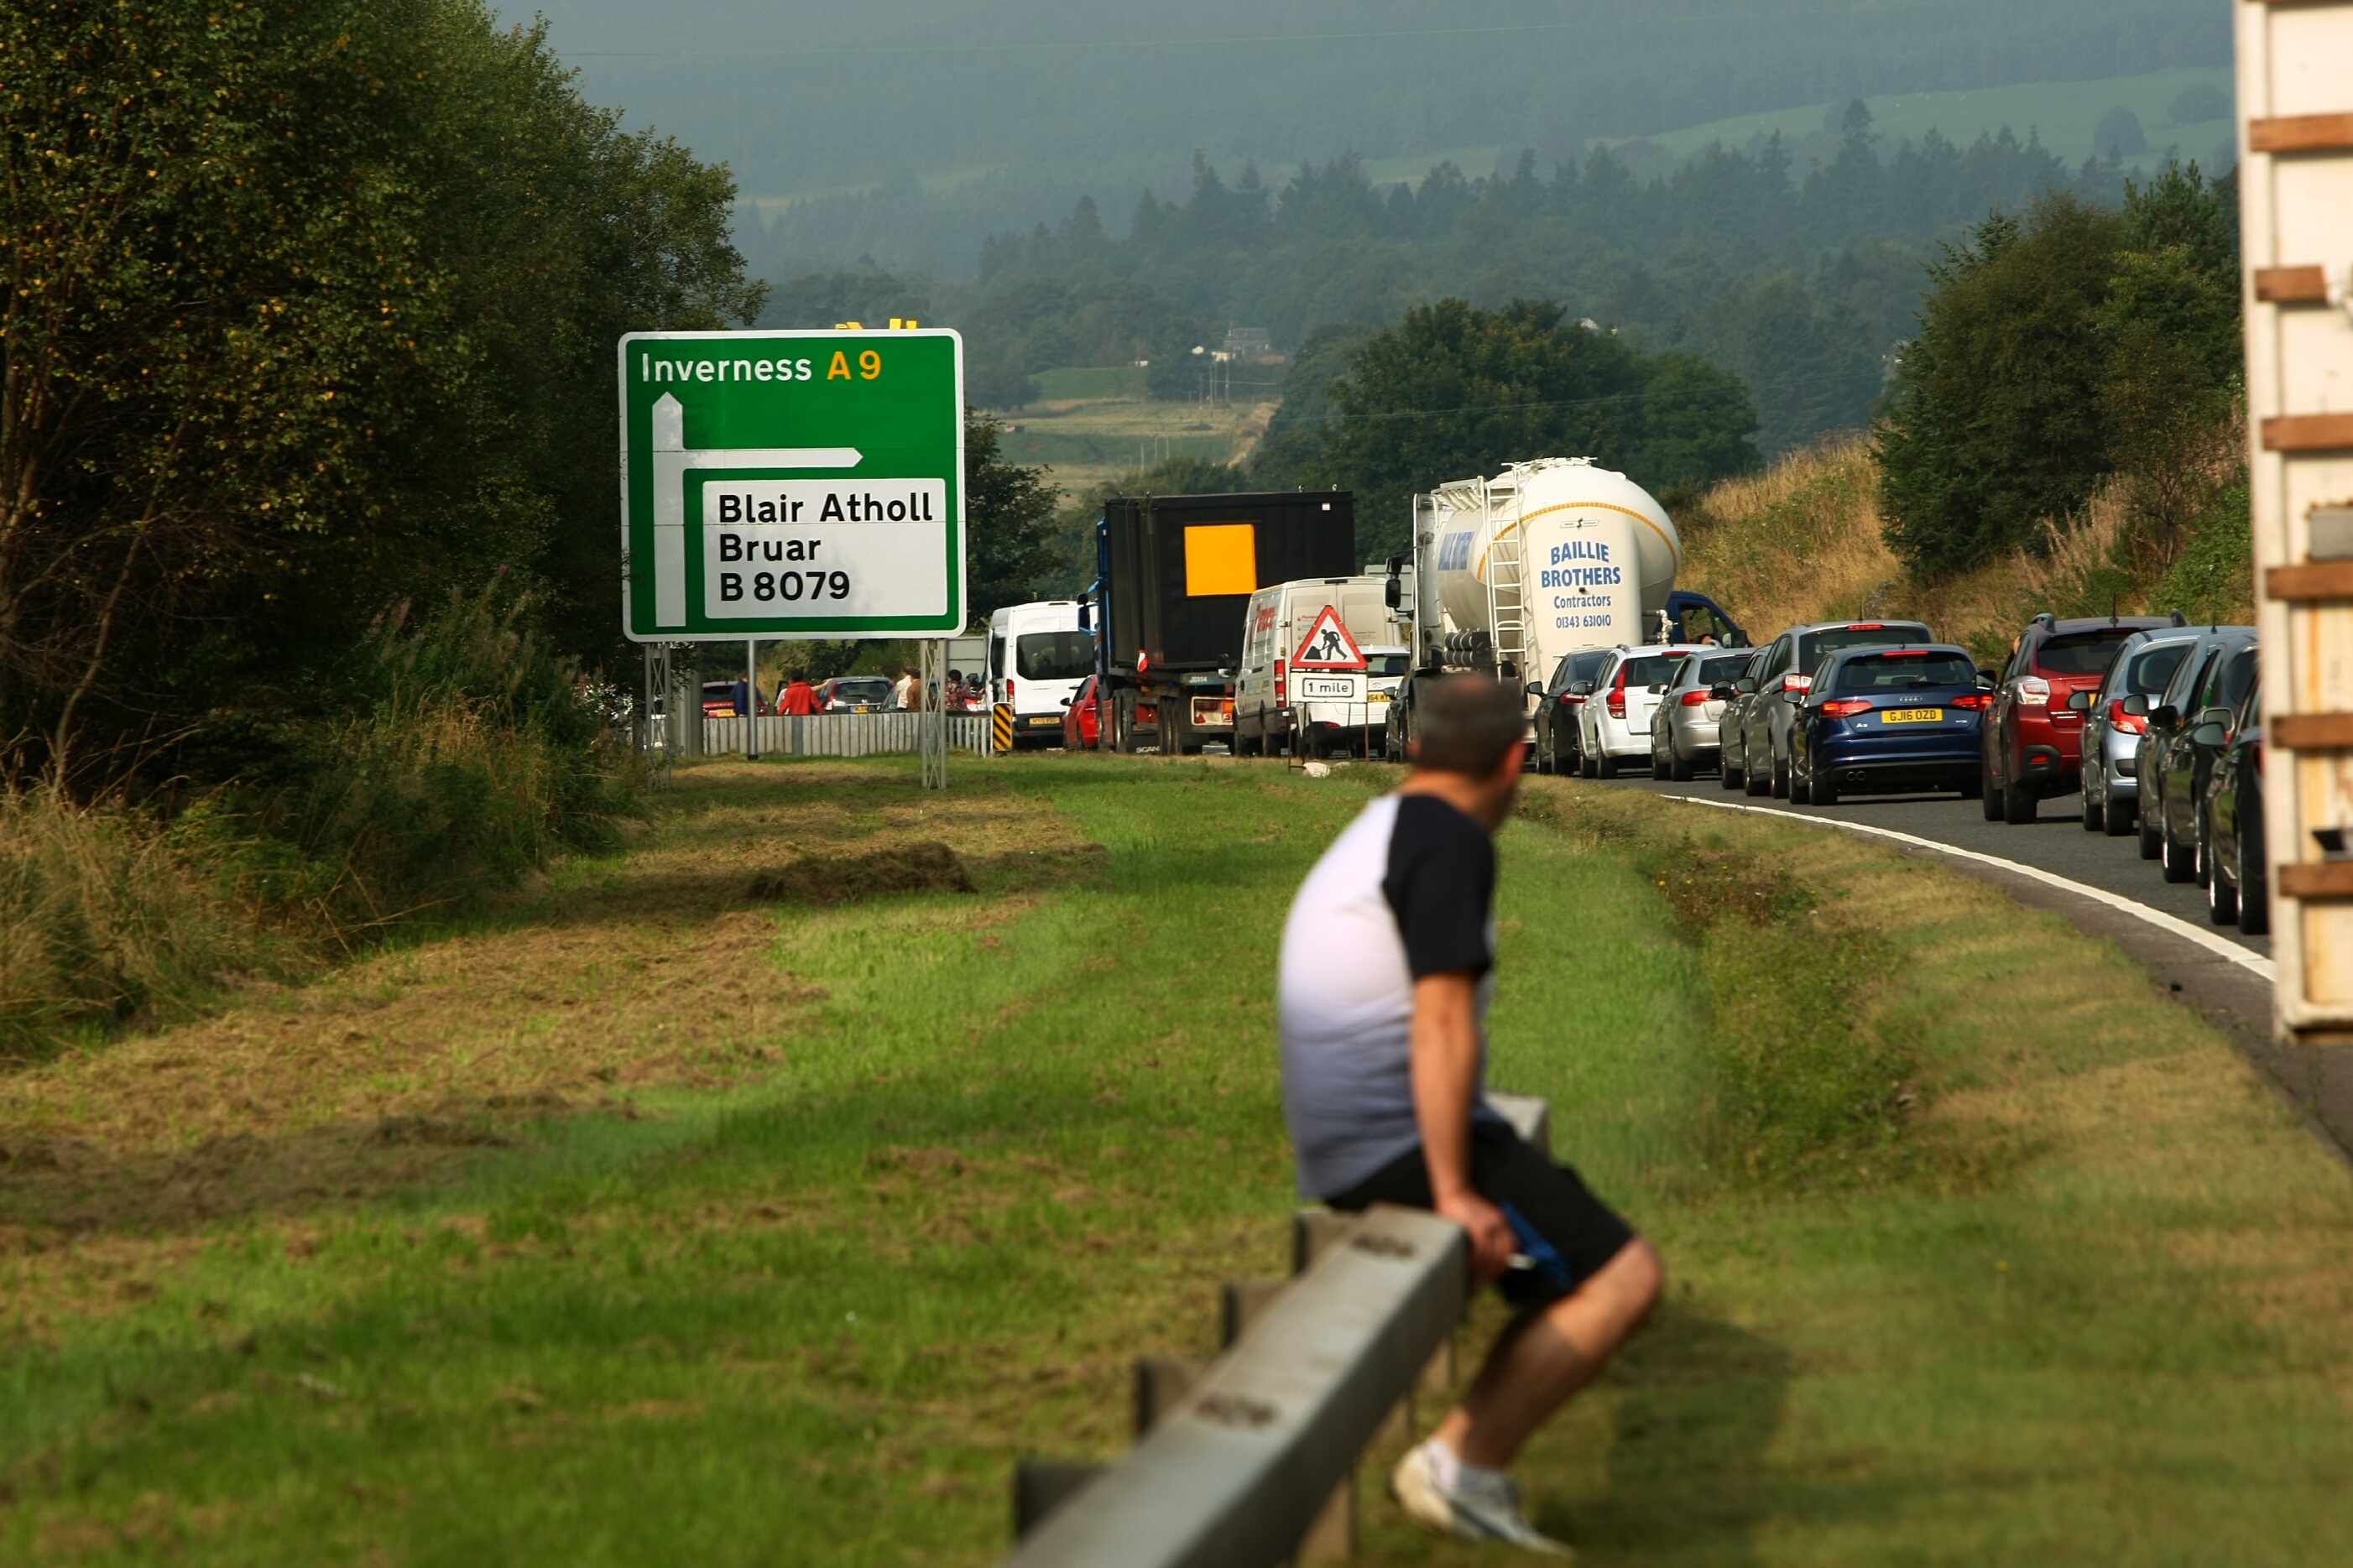 Drivers waiting to find out when the A9 will re-open following an accident near Blair Atholl.